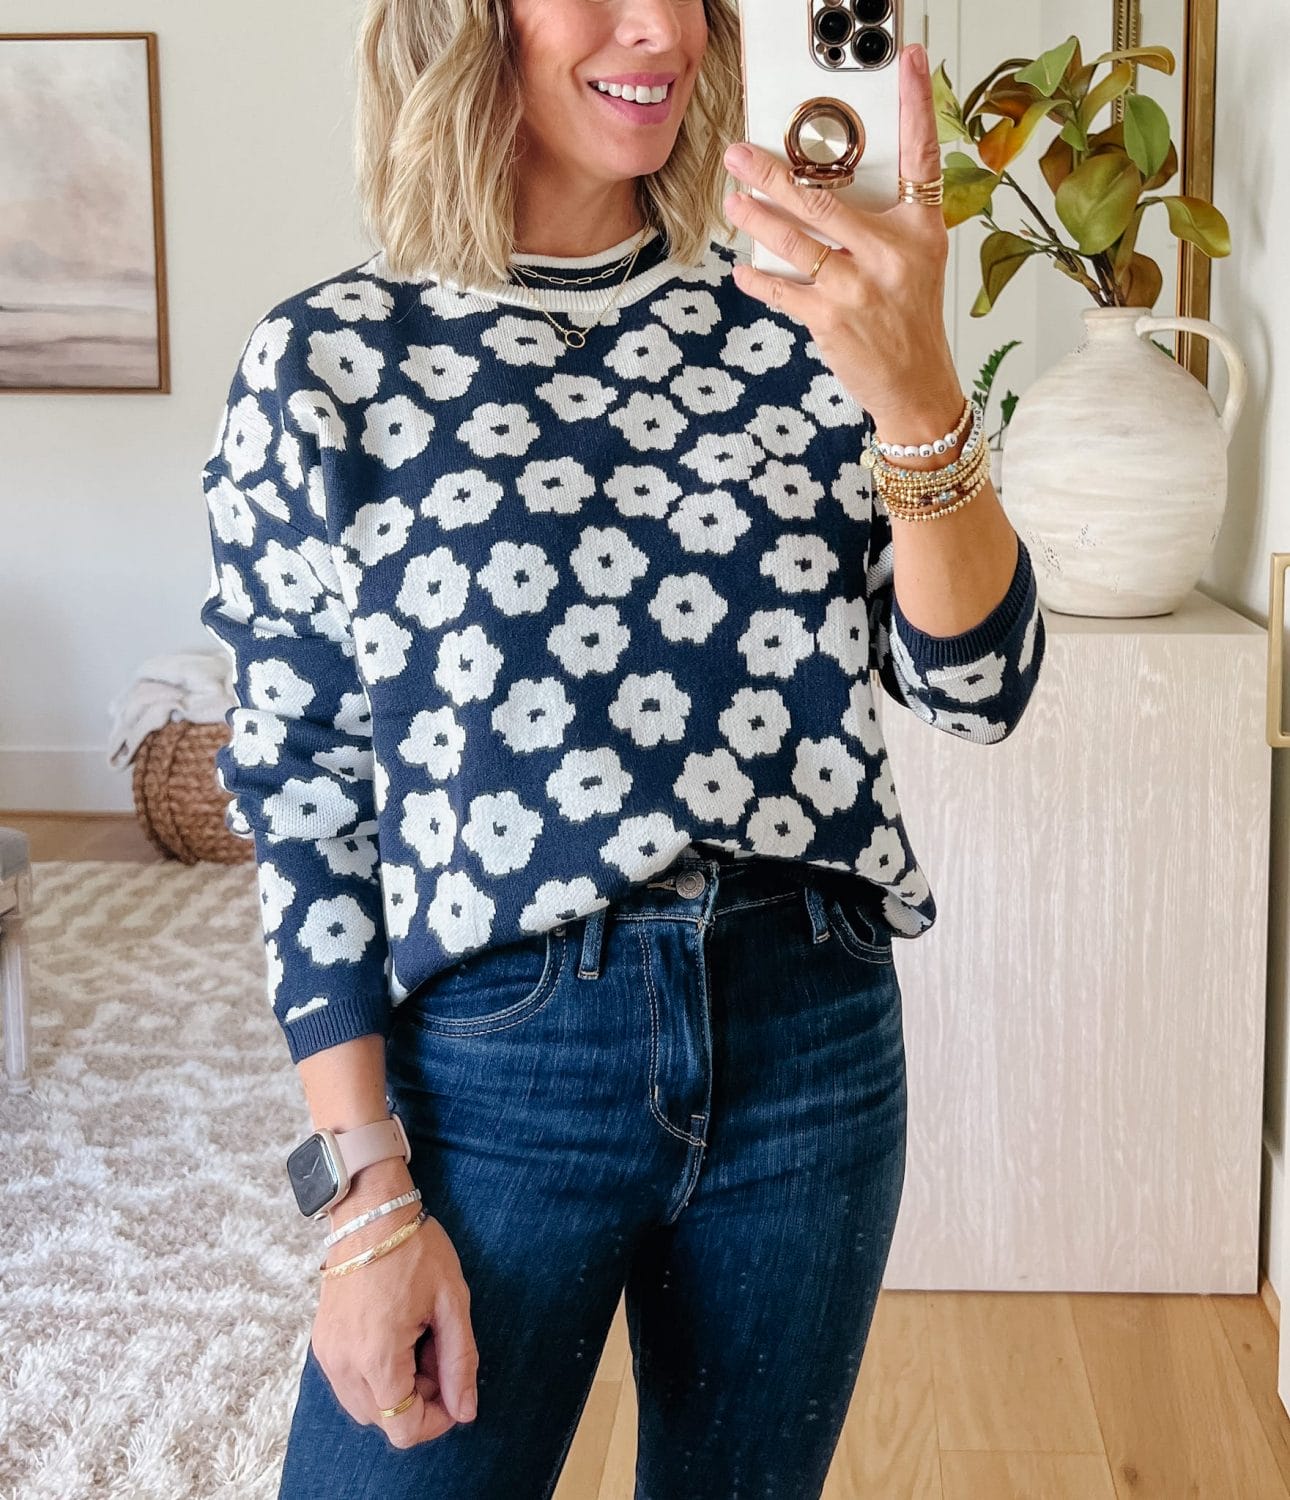 Floral Sweater, Jeans, Booties